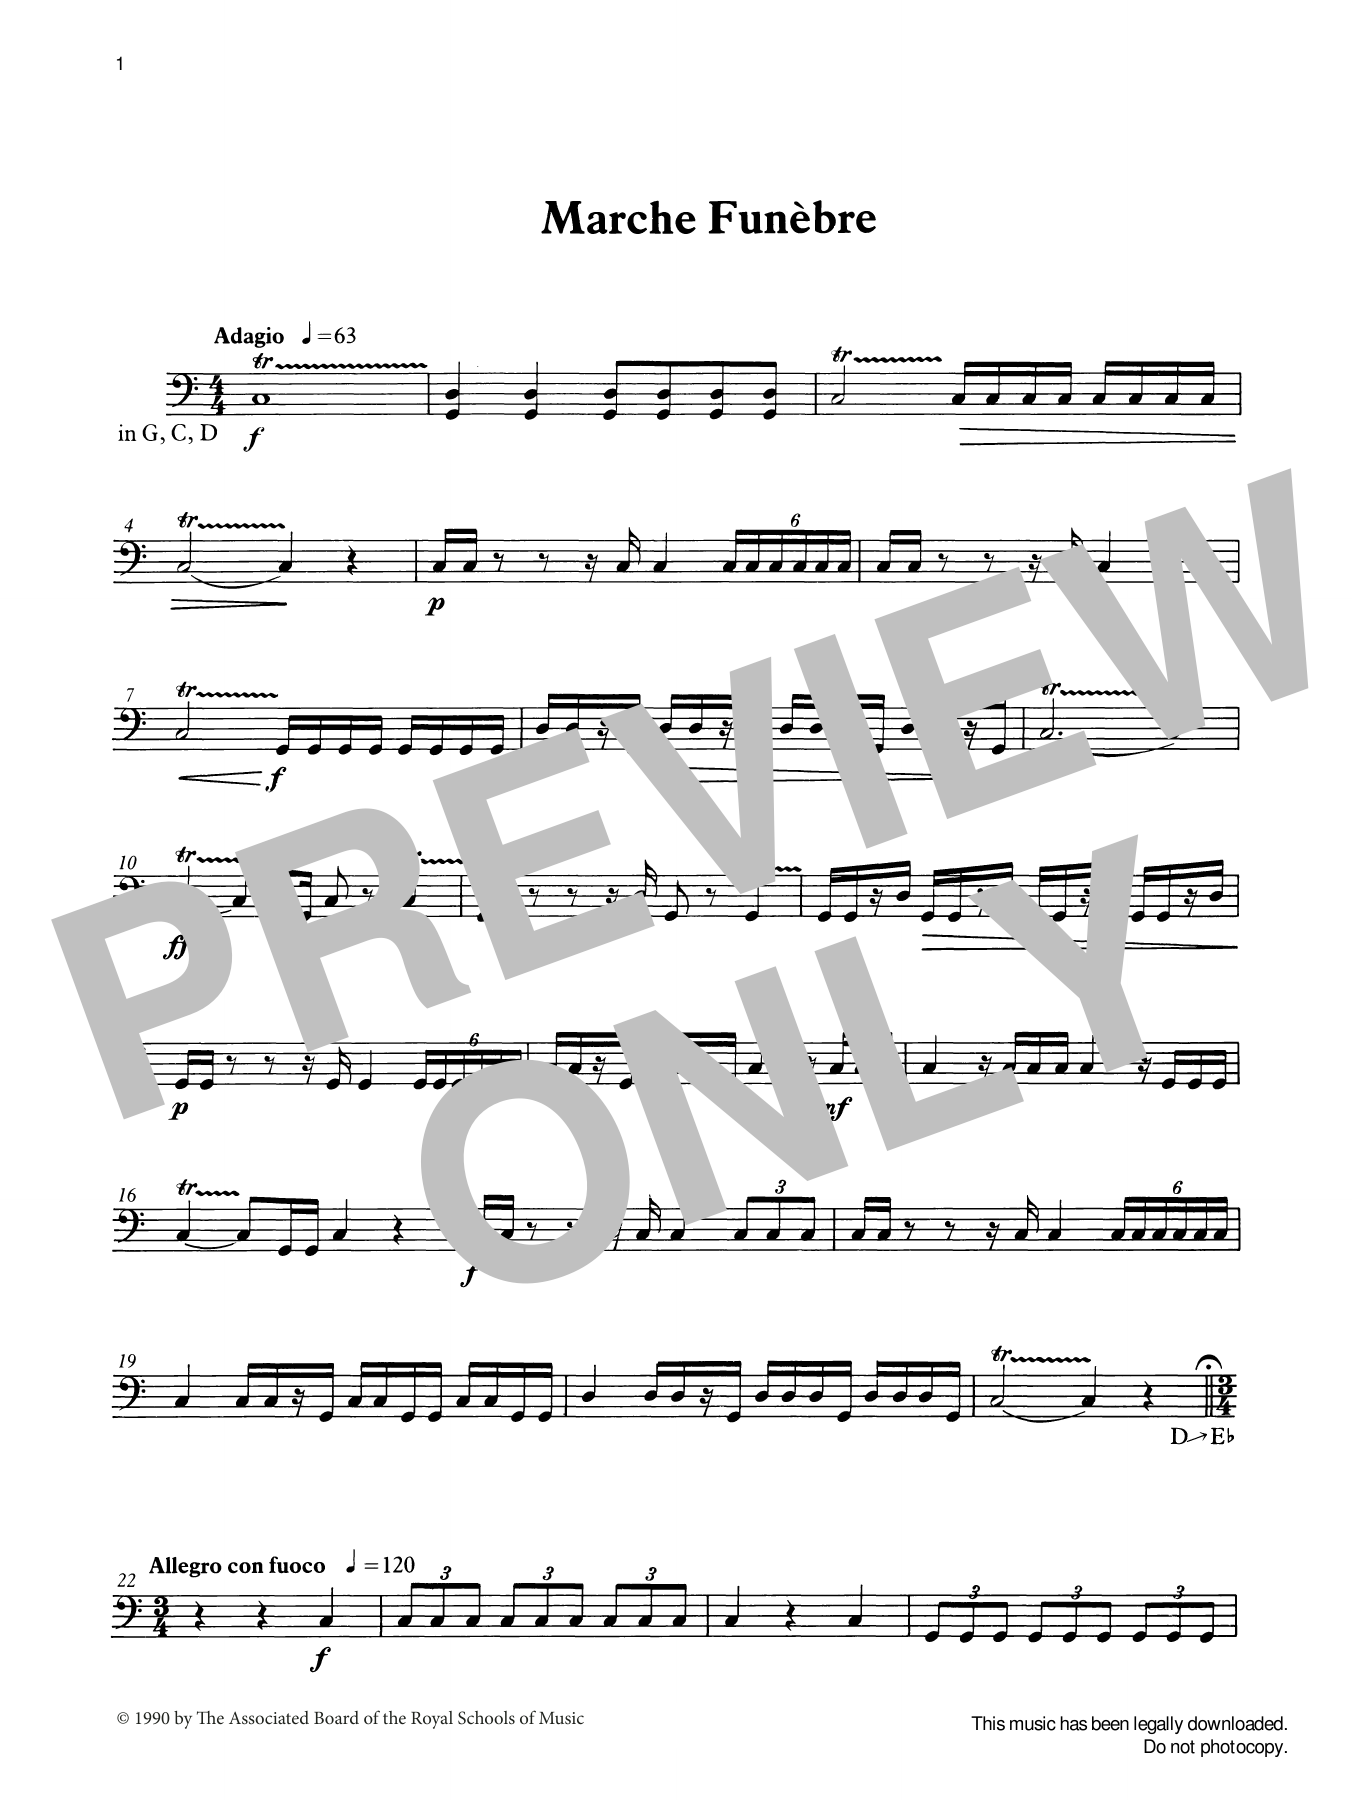 Download Ian Wright Marche Funèbre from Graded Music Sheet Music